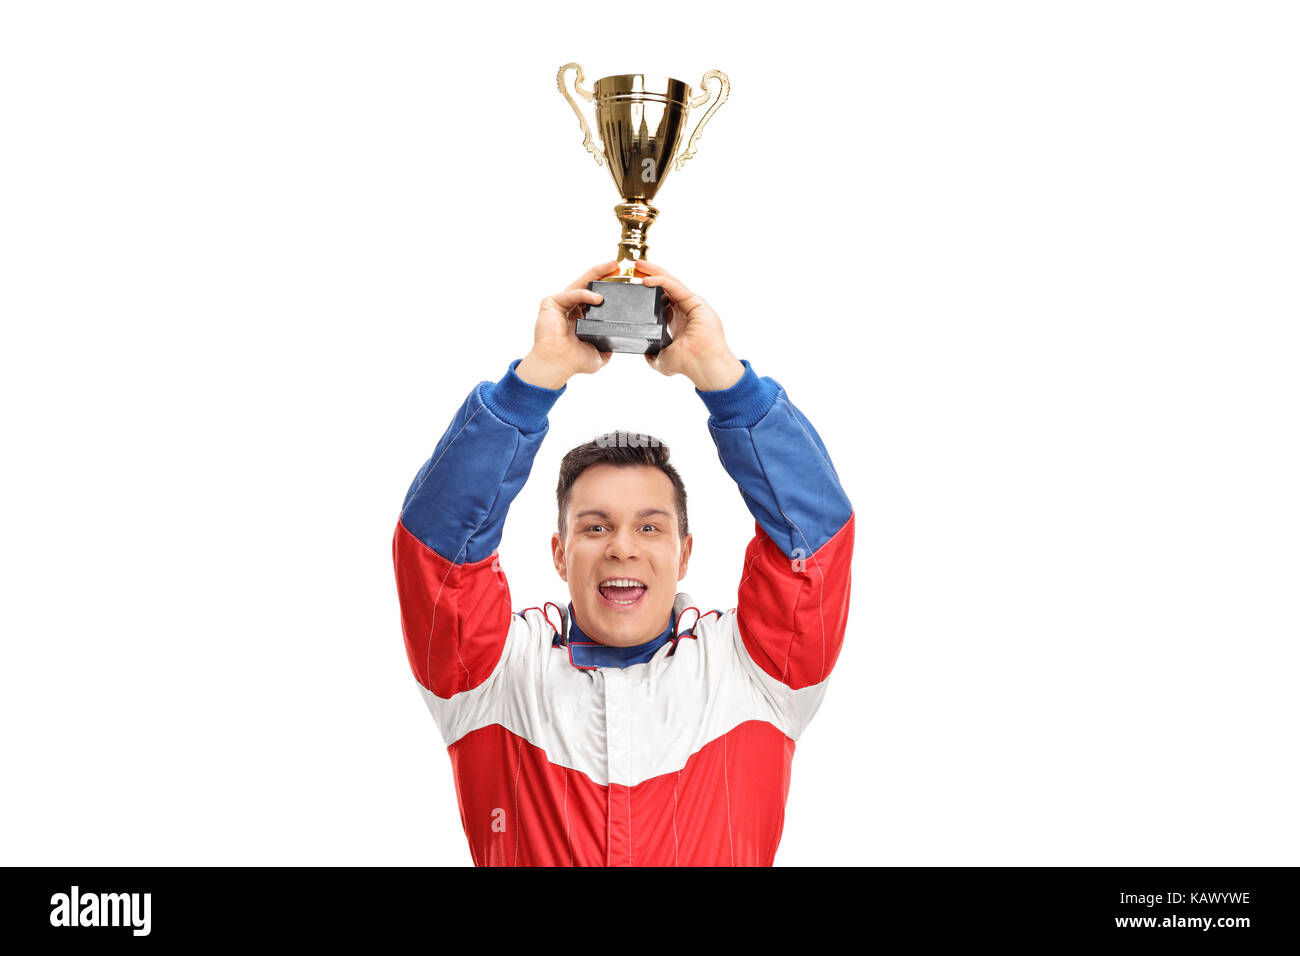 Overjoyed car racing champion holding a gold trophy isolated on white background Stock Photo